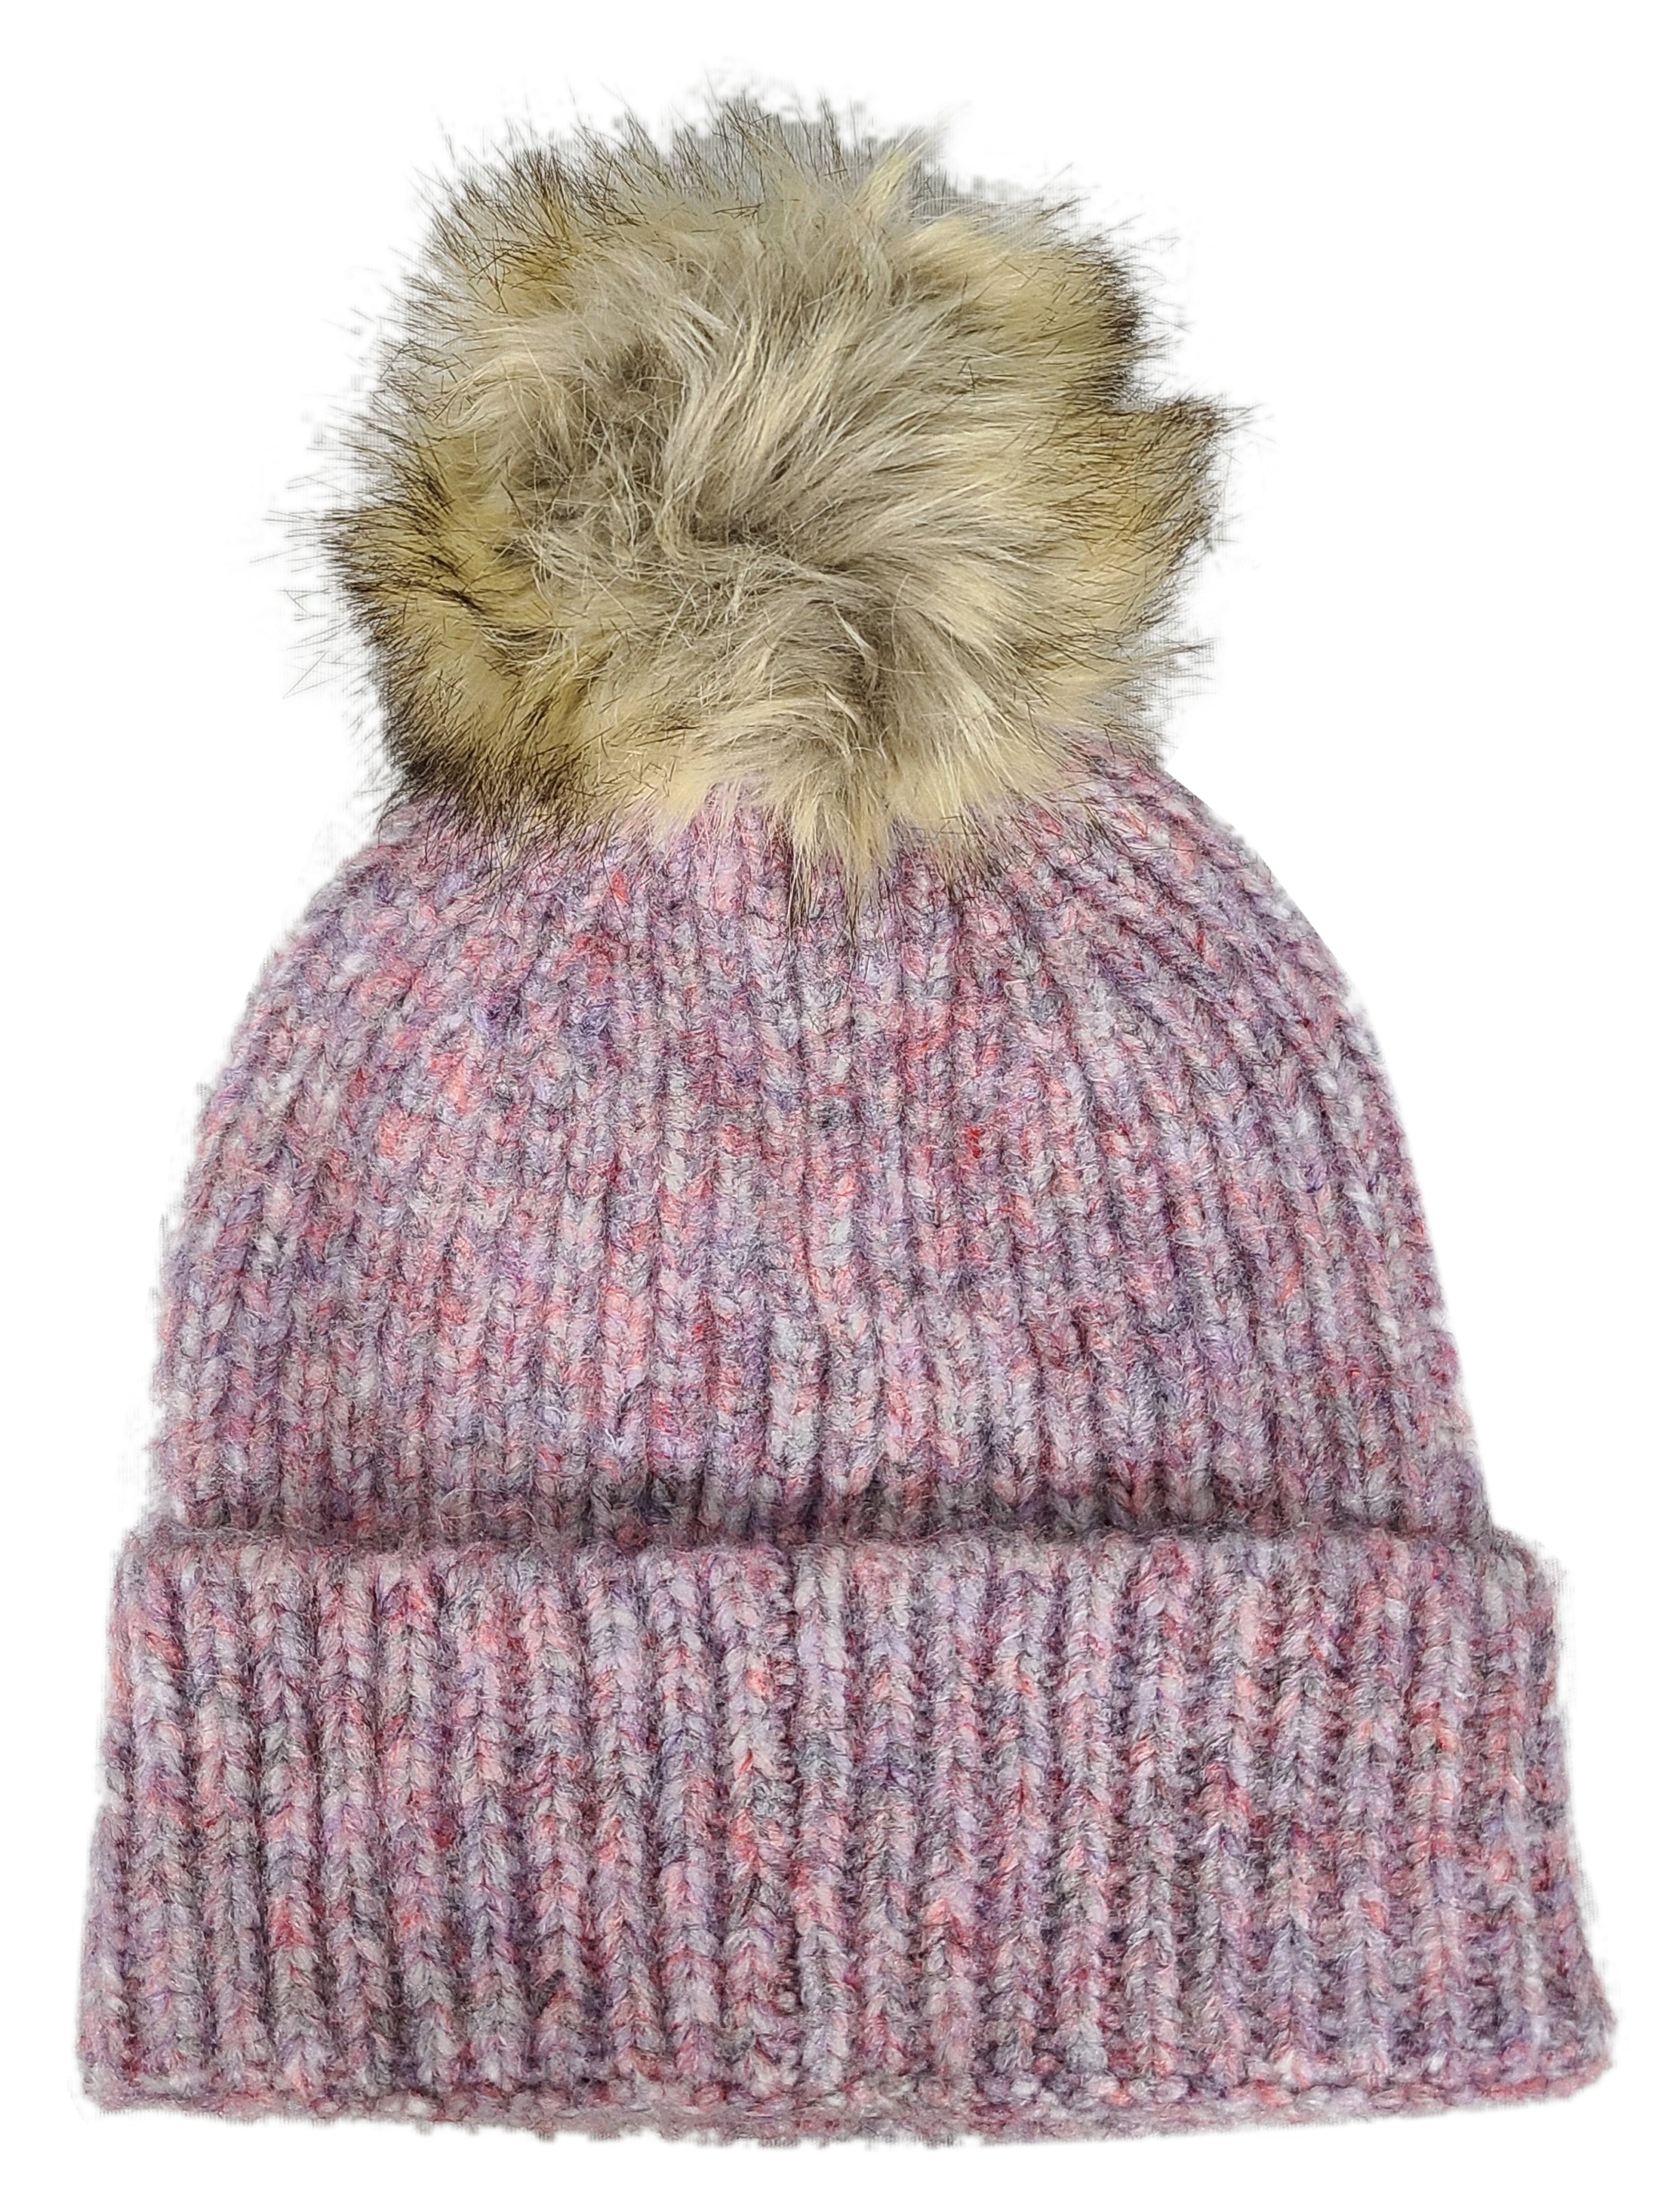 Hat-2074 Beanie with Faux Fur Pom Cotton Candy Multi